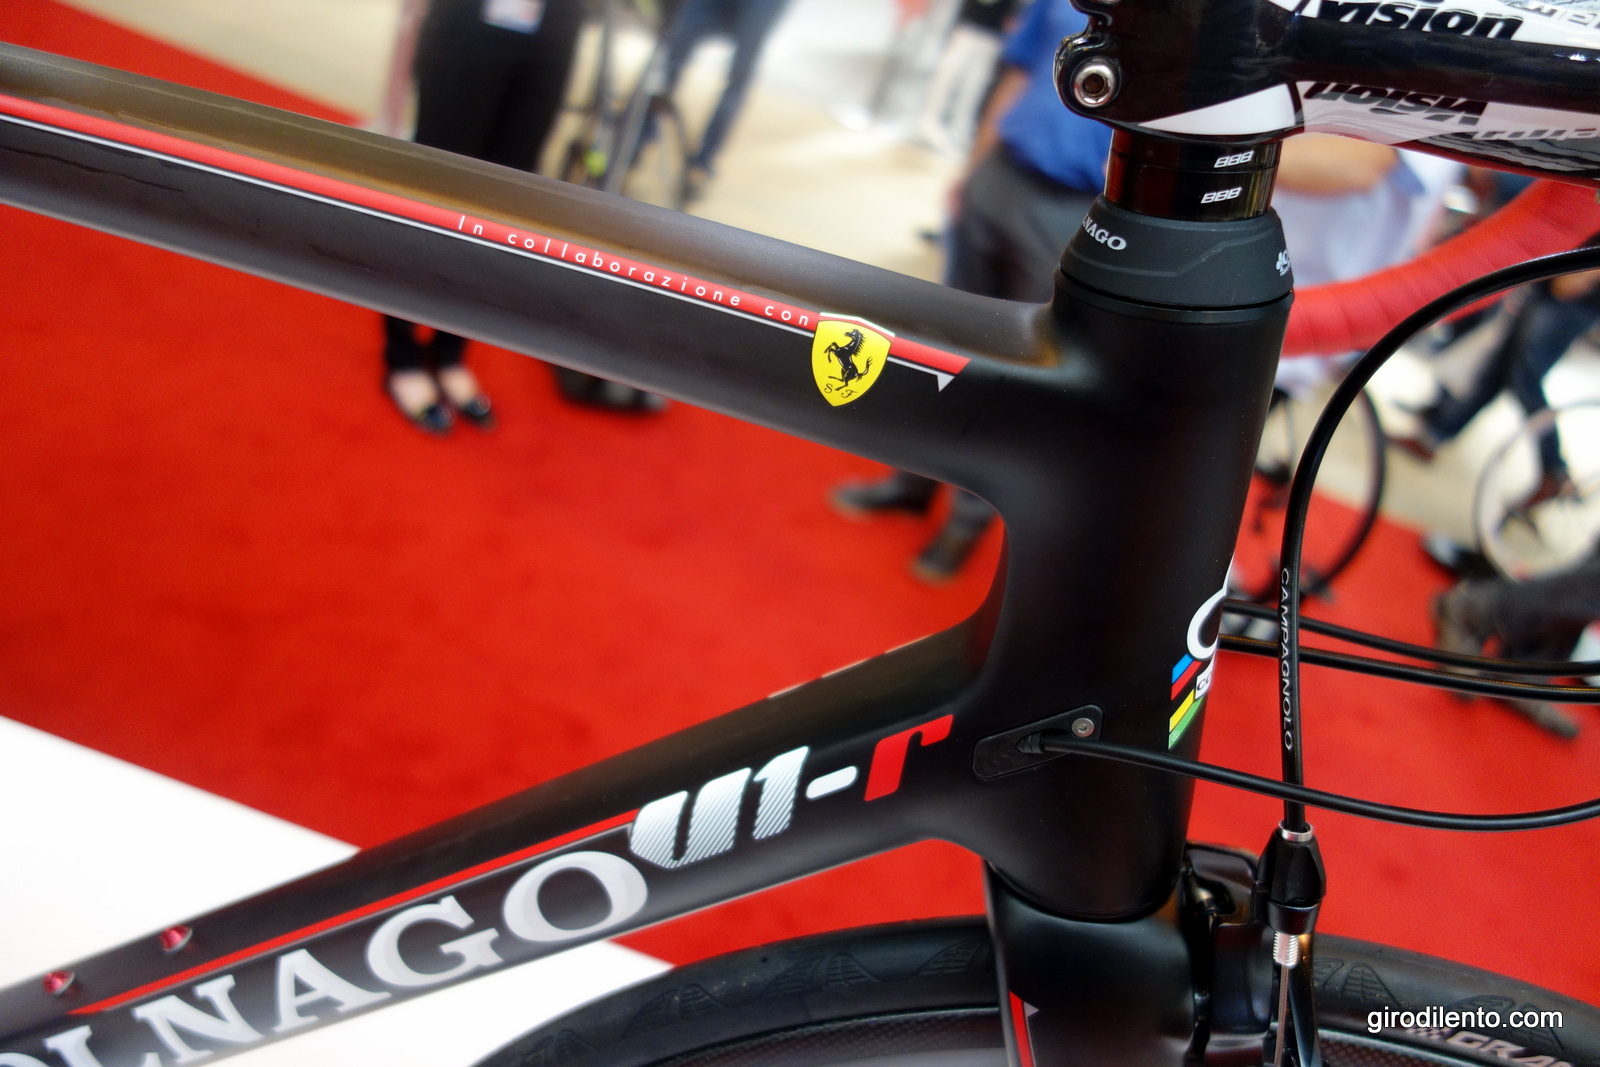 Colnago were "working" their Ferrari friendship again.... but who can blame them - wouldn't you?